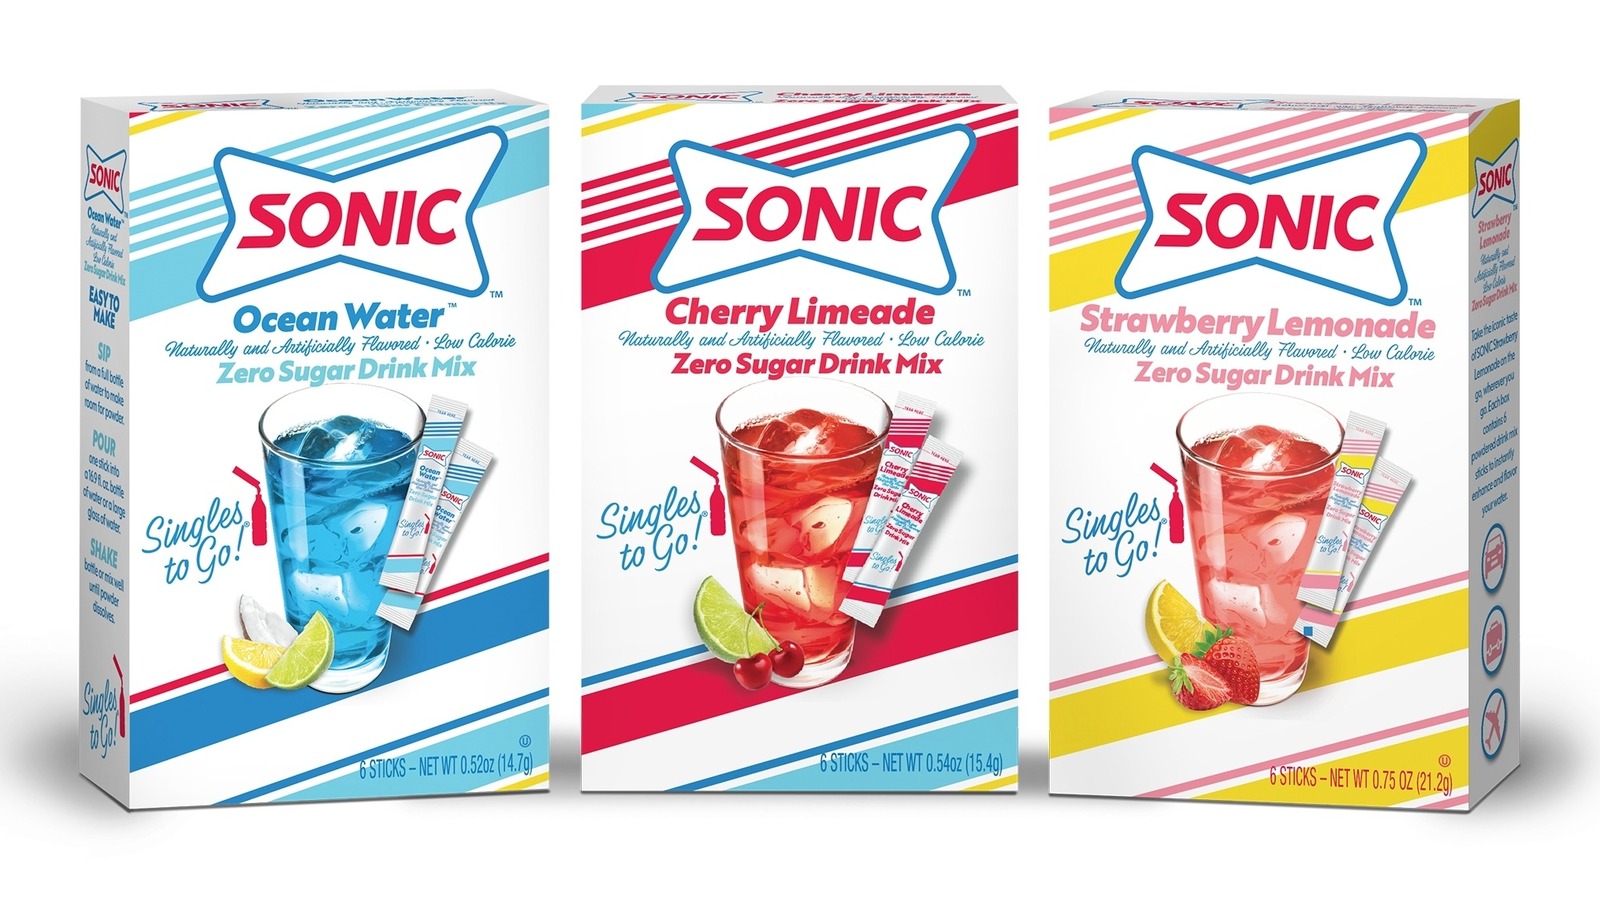 Sonic's New Flavor Mixes Let You Make These Popular Drinks At Home